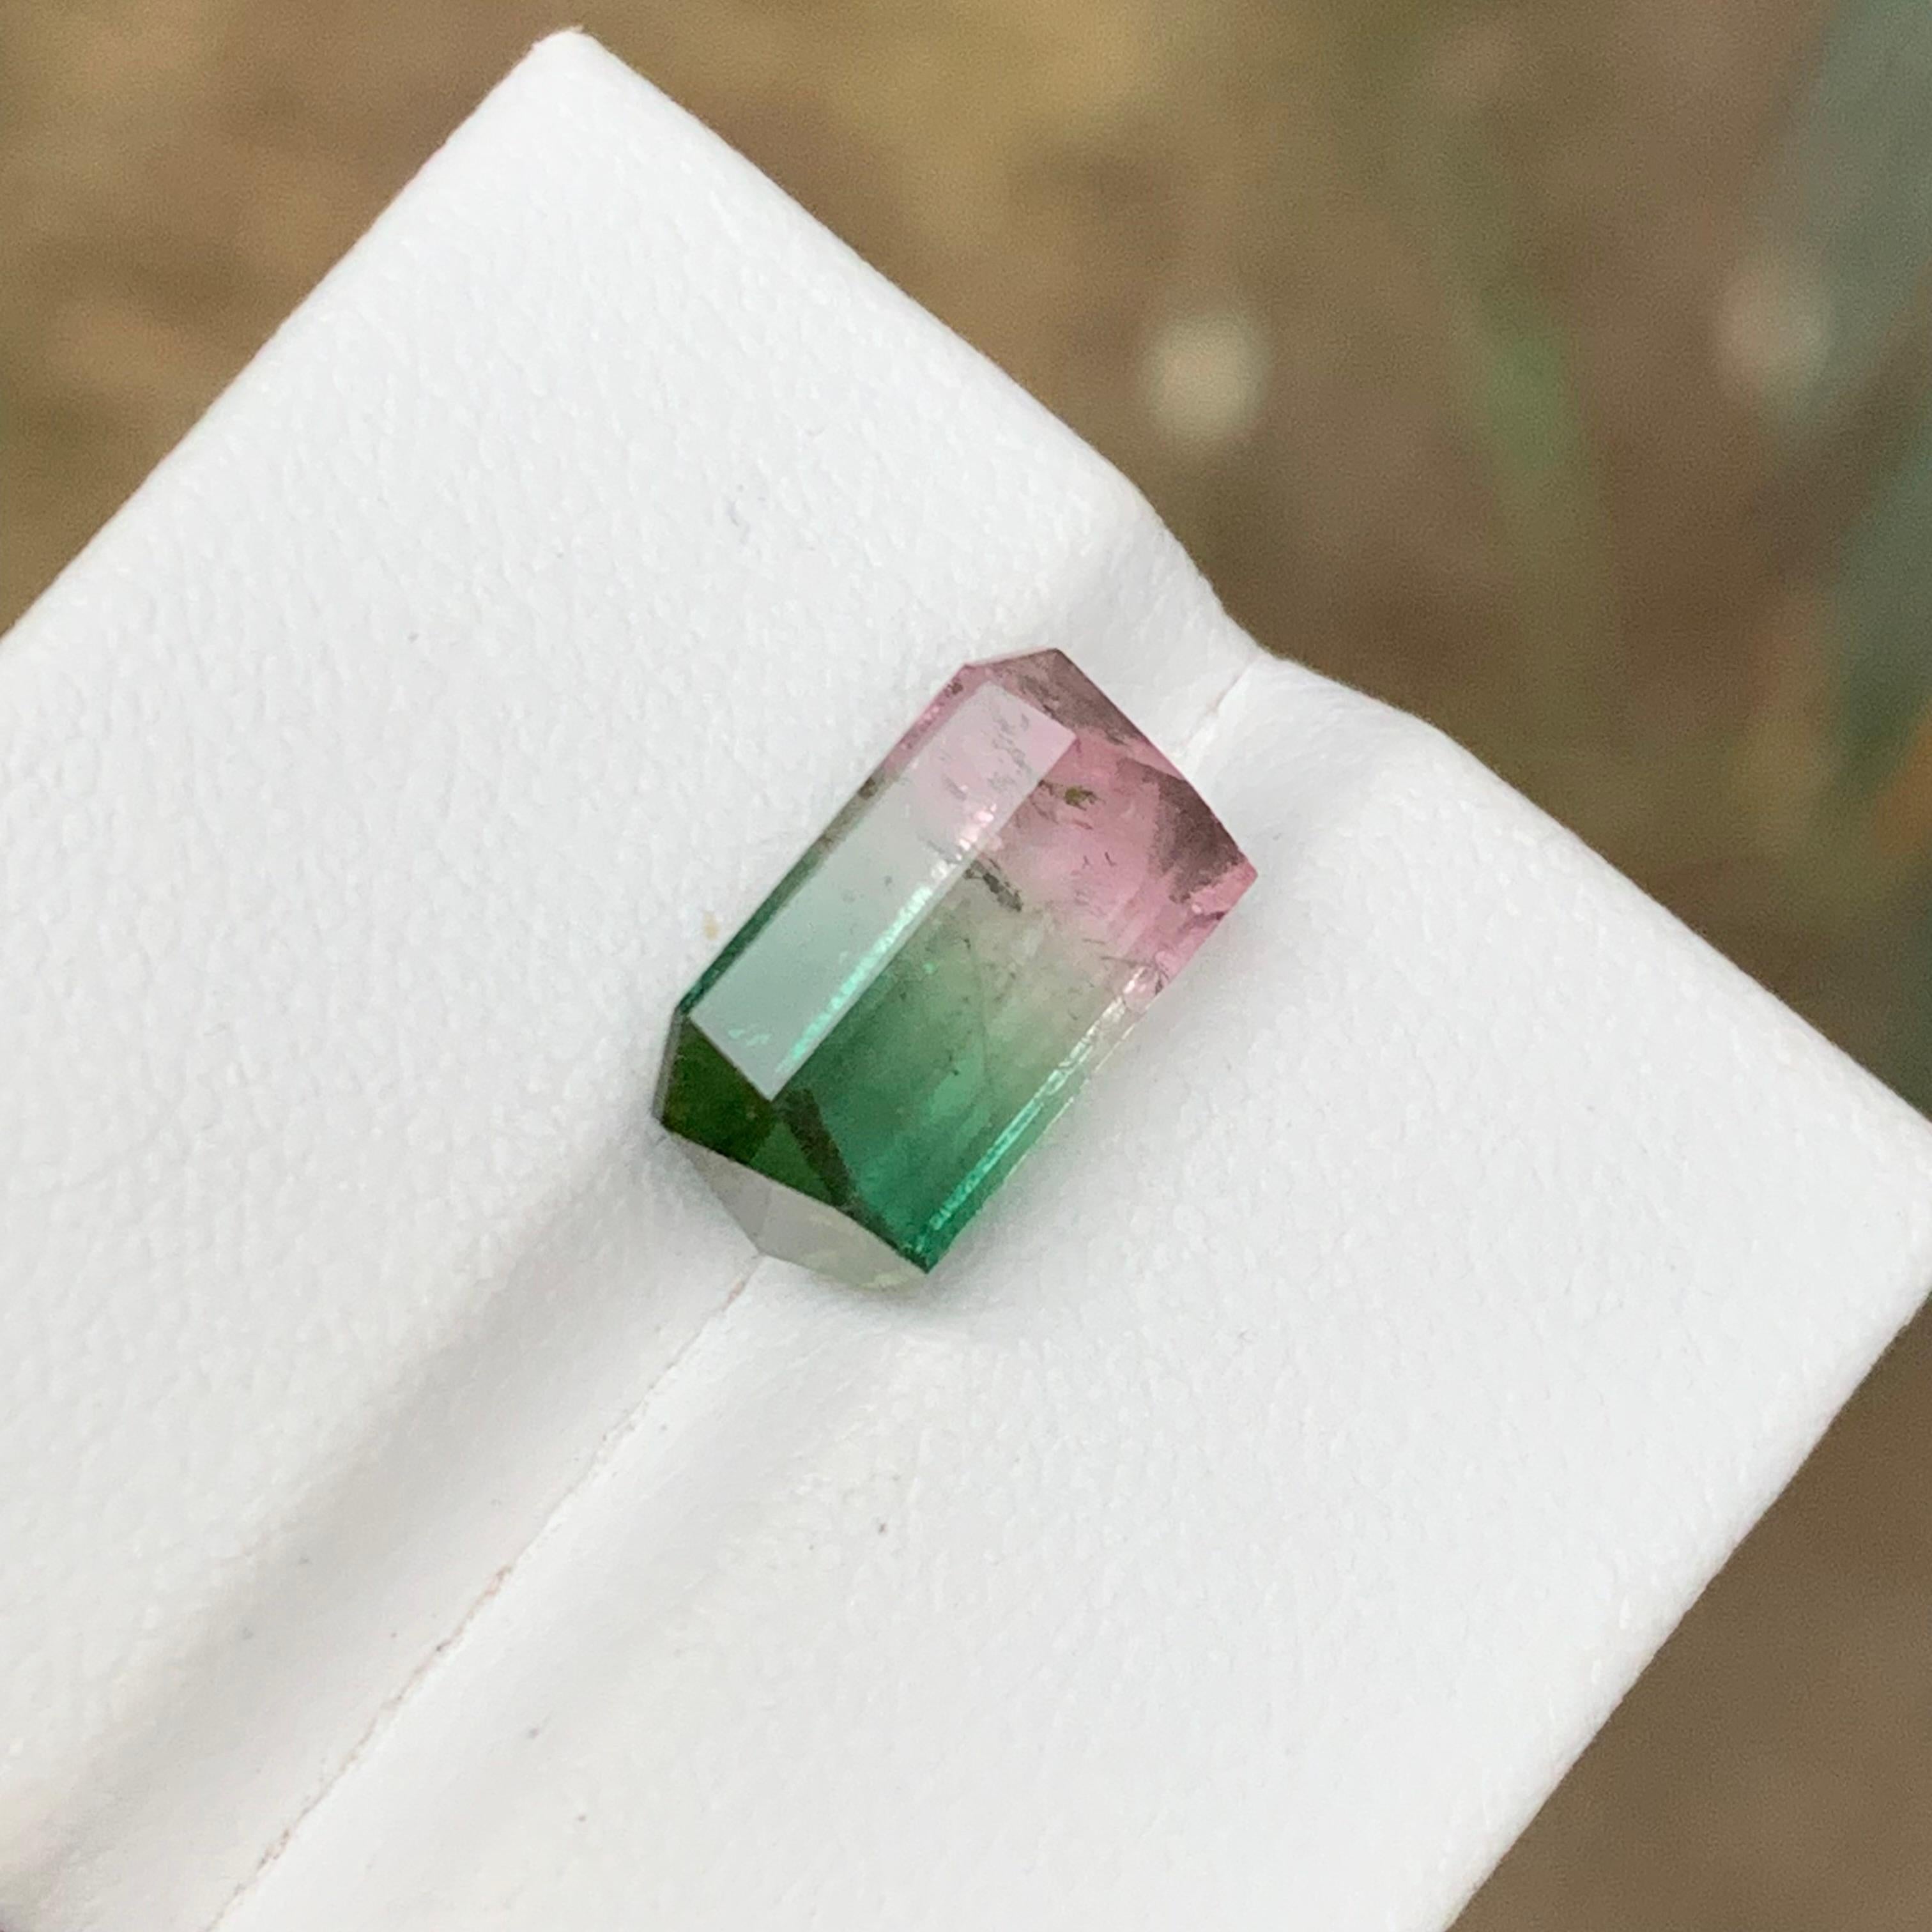 Women's or Men's Rare Bicolor Watermelon Bluish Green & Pink Tourmaline Gemstone 5.90 Ct for Ring For Sale